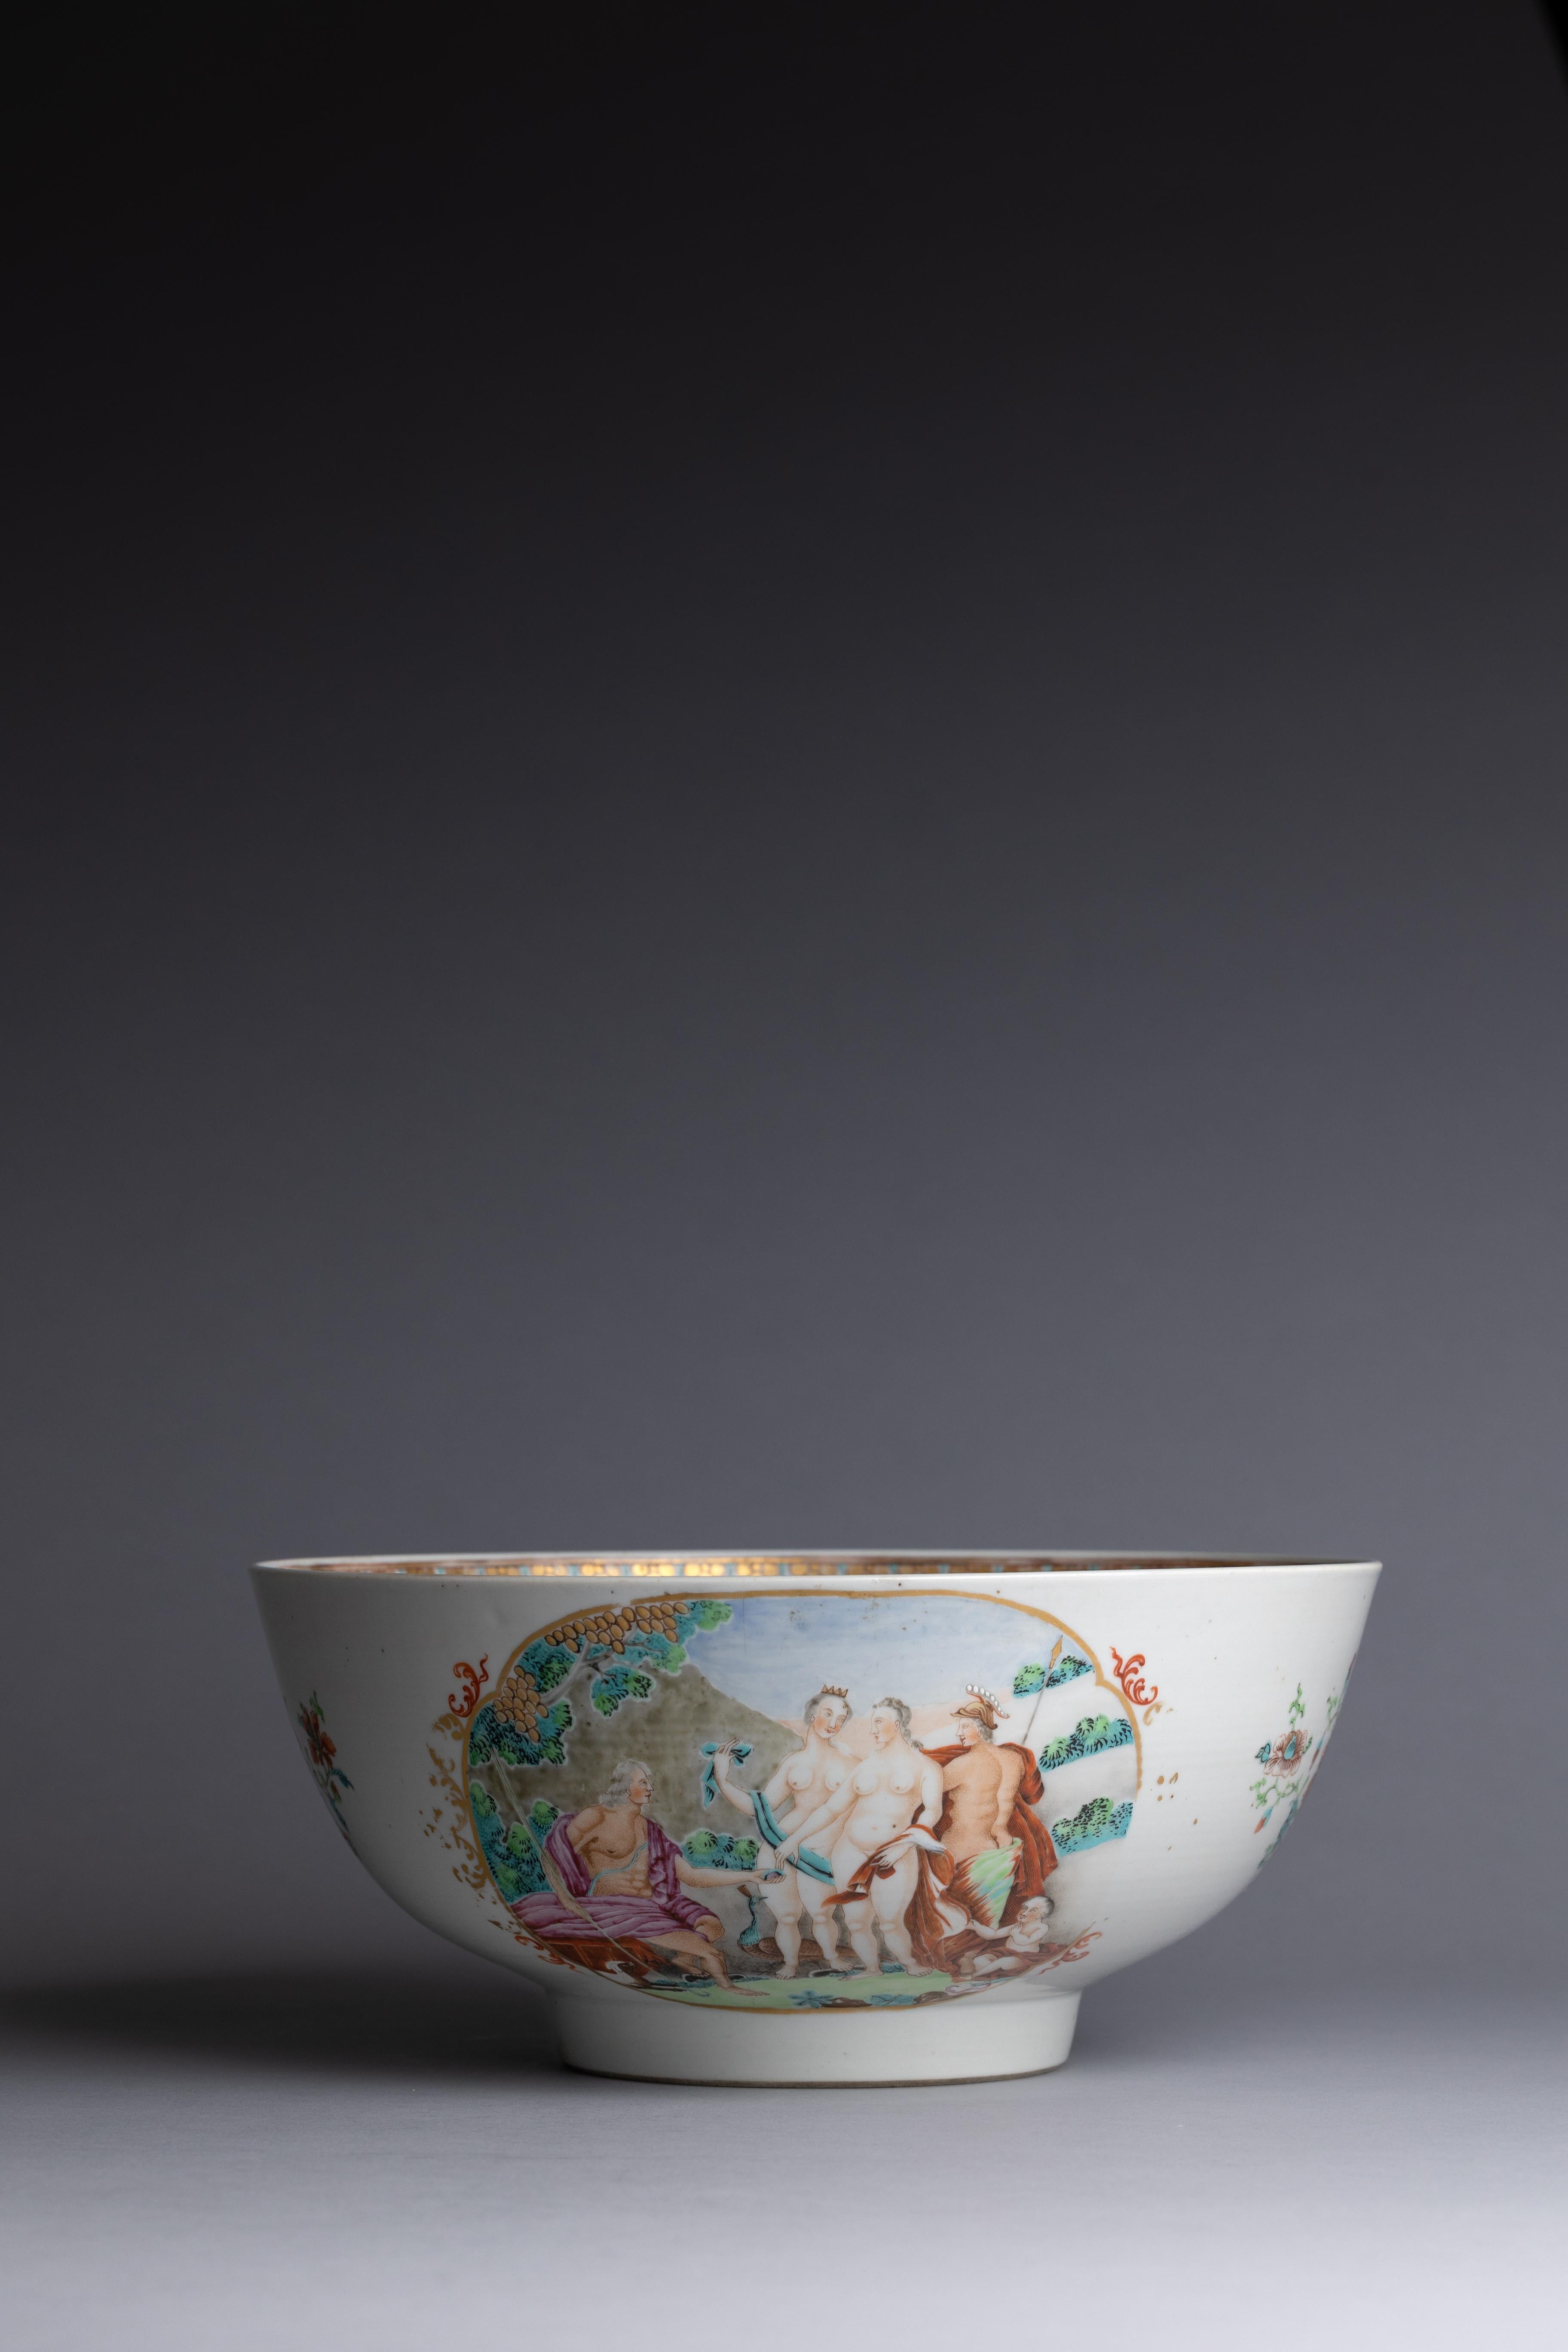 18th Century Chinese Export Porcelain Punch Bowl In Good Condition For Sale In Fort Lauderdale, FL